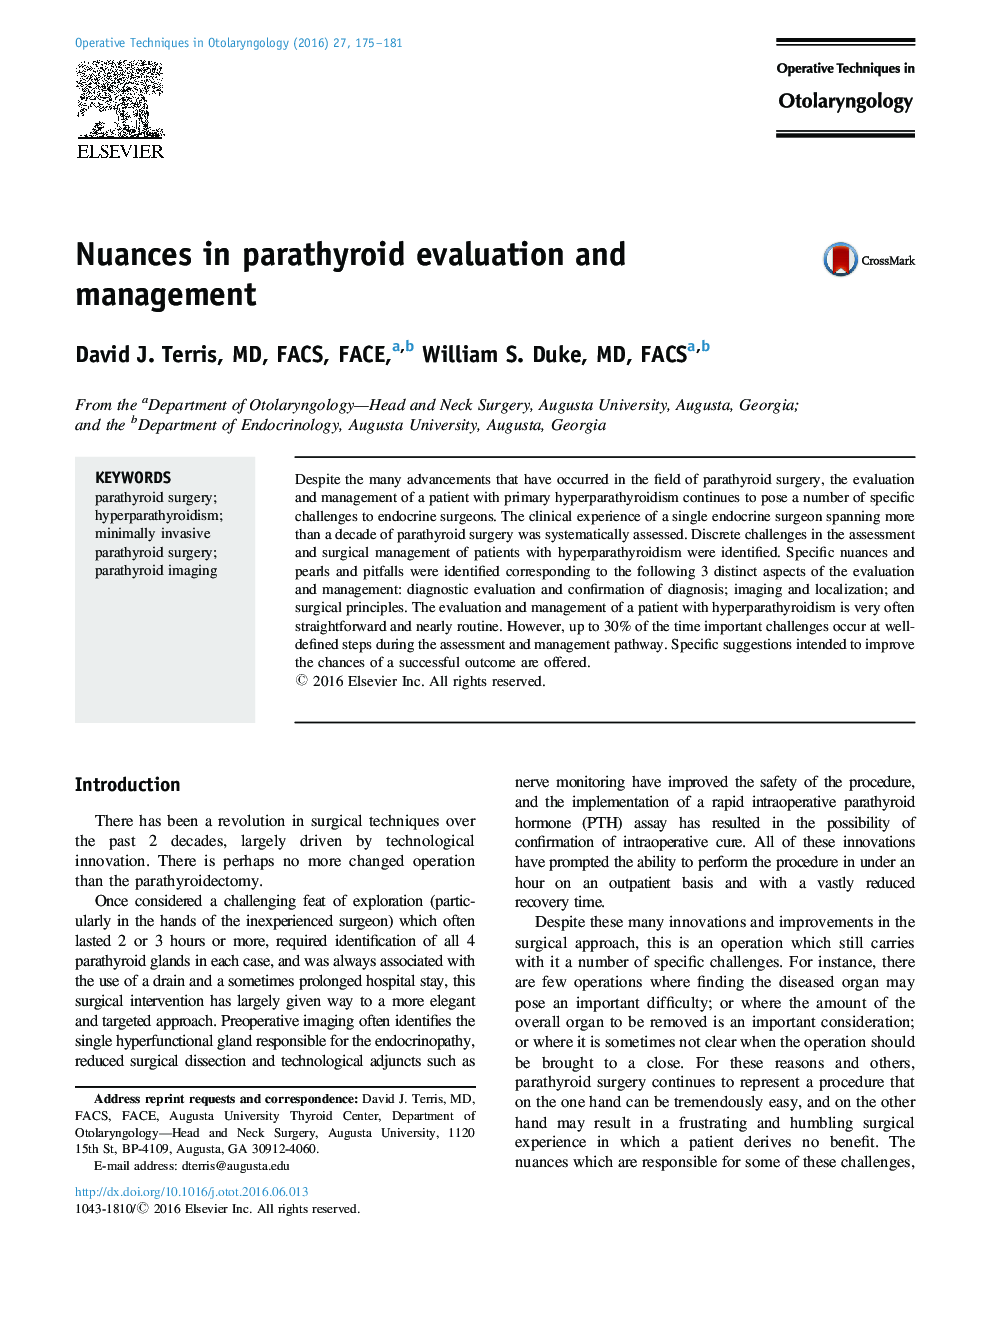 Nuances in parathyroid evaluation and management